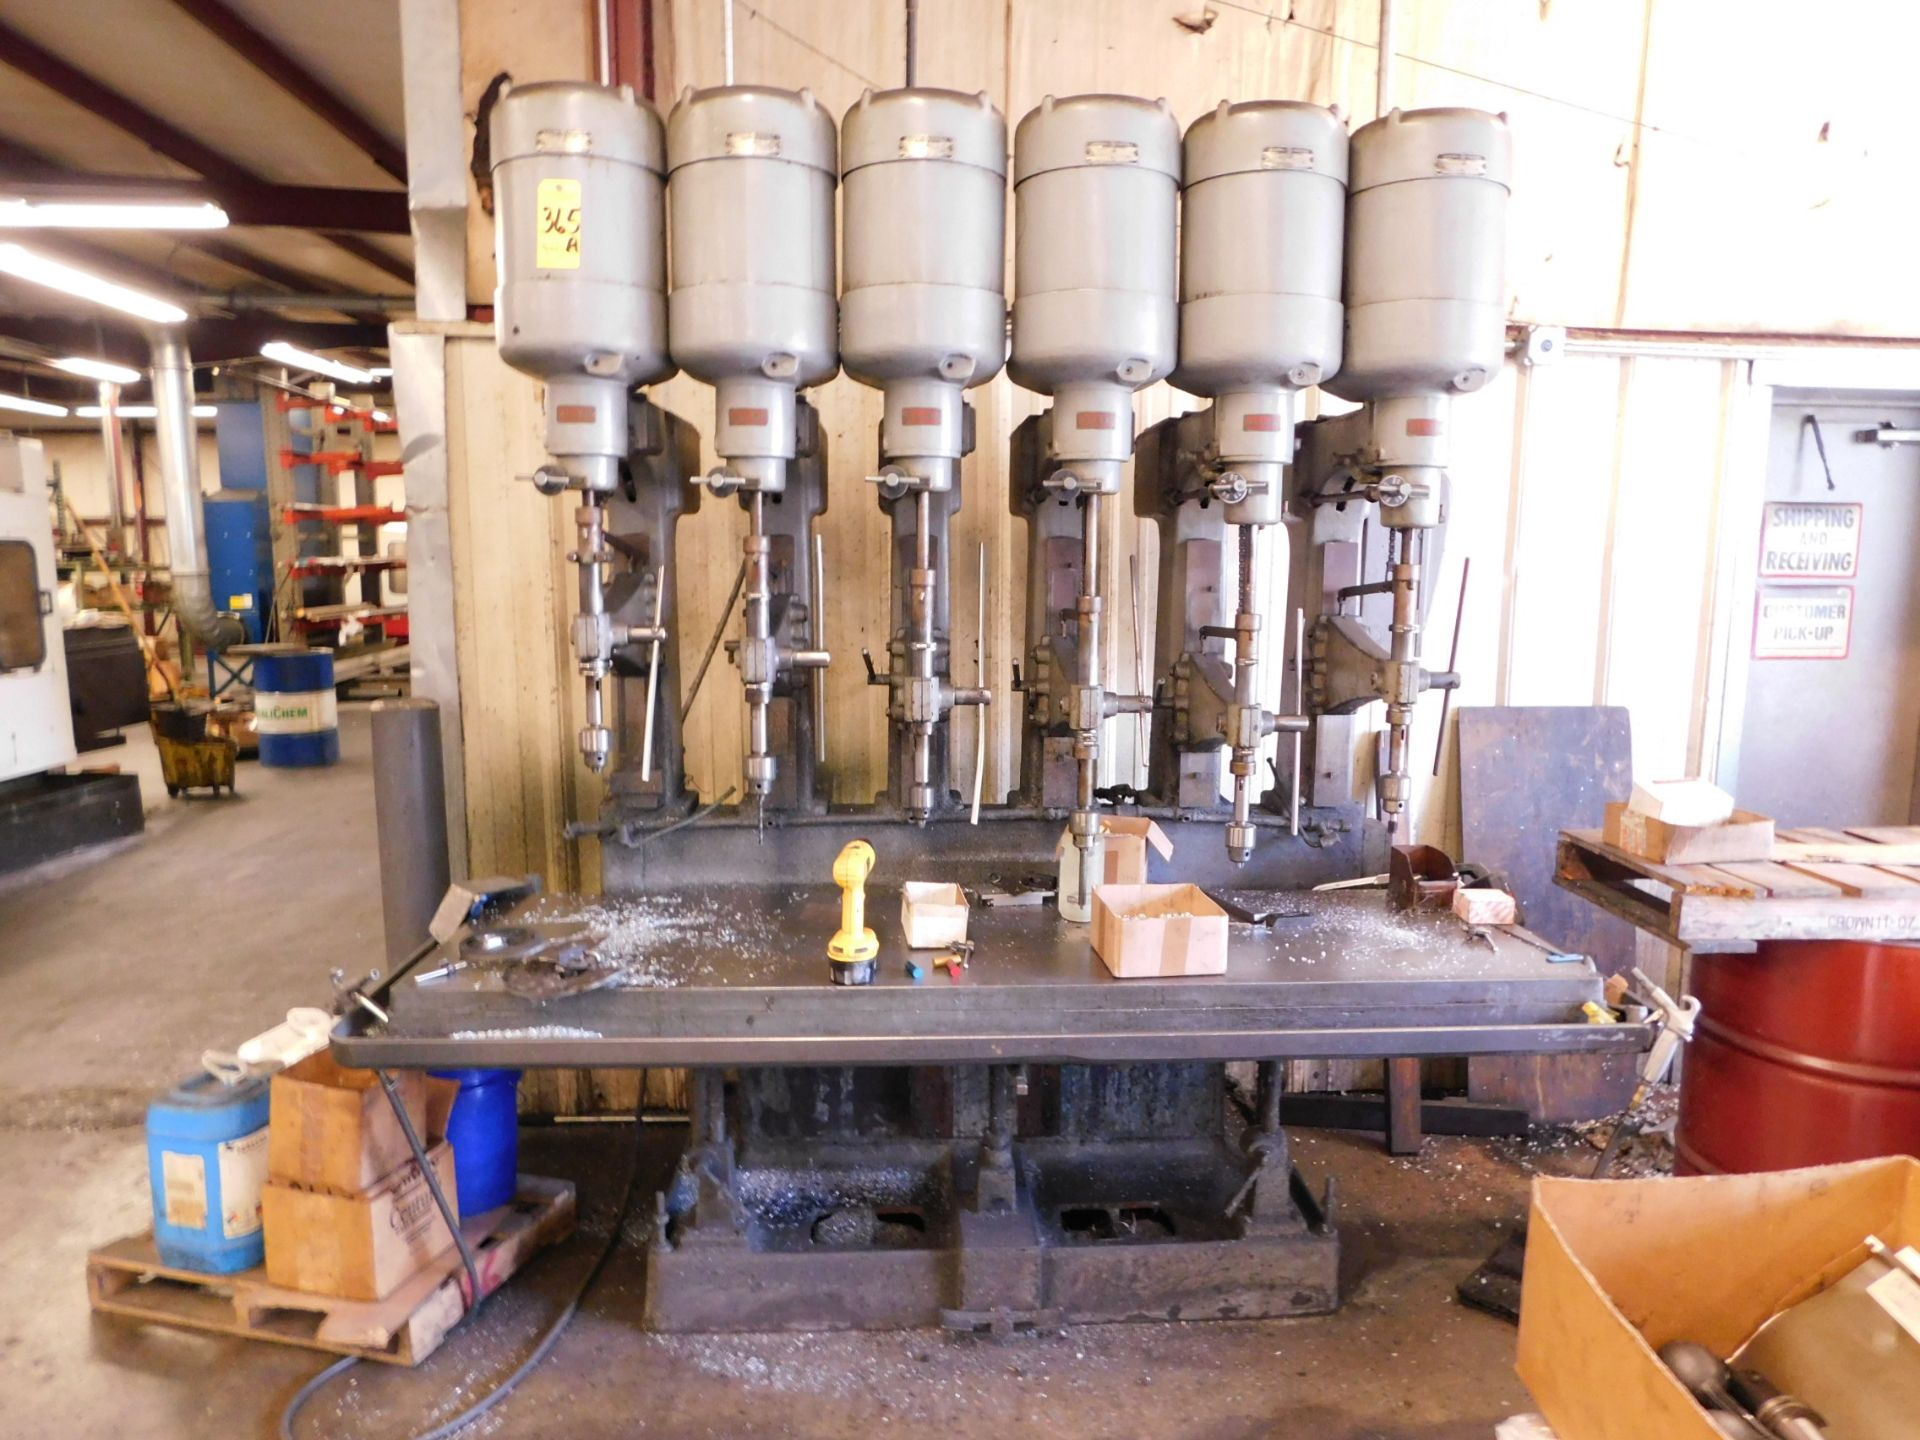 Allen 6-Spindle Drill Press, s/n 27545, 24" X 36" Production Table, 2 MT Spindles